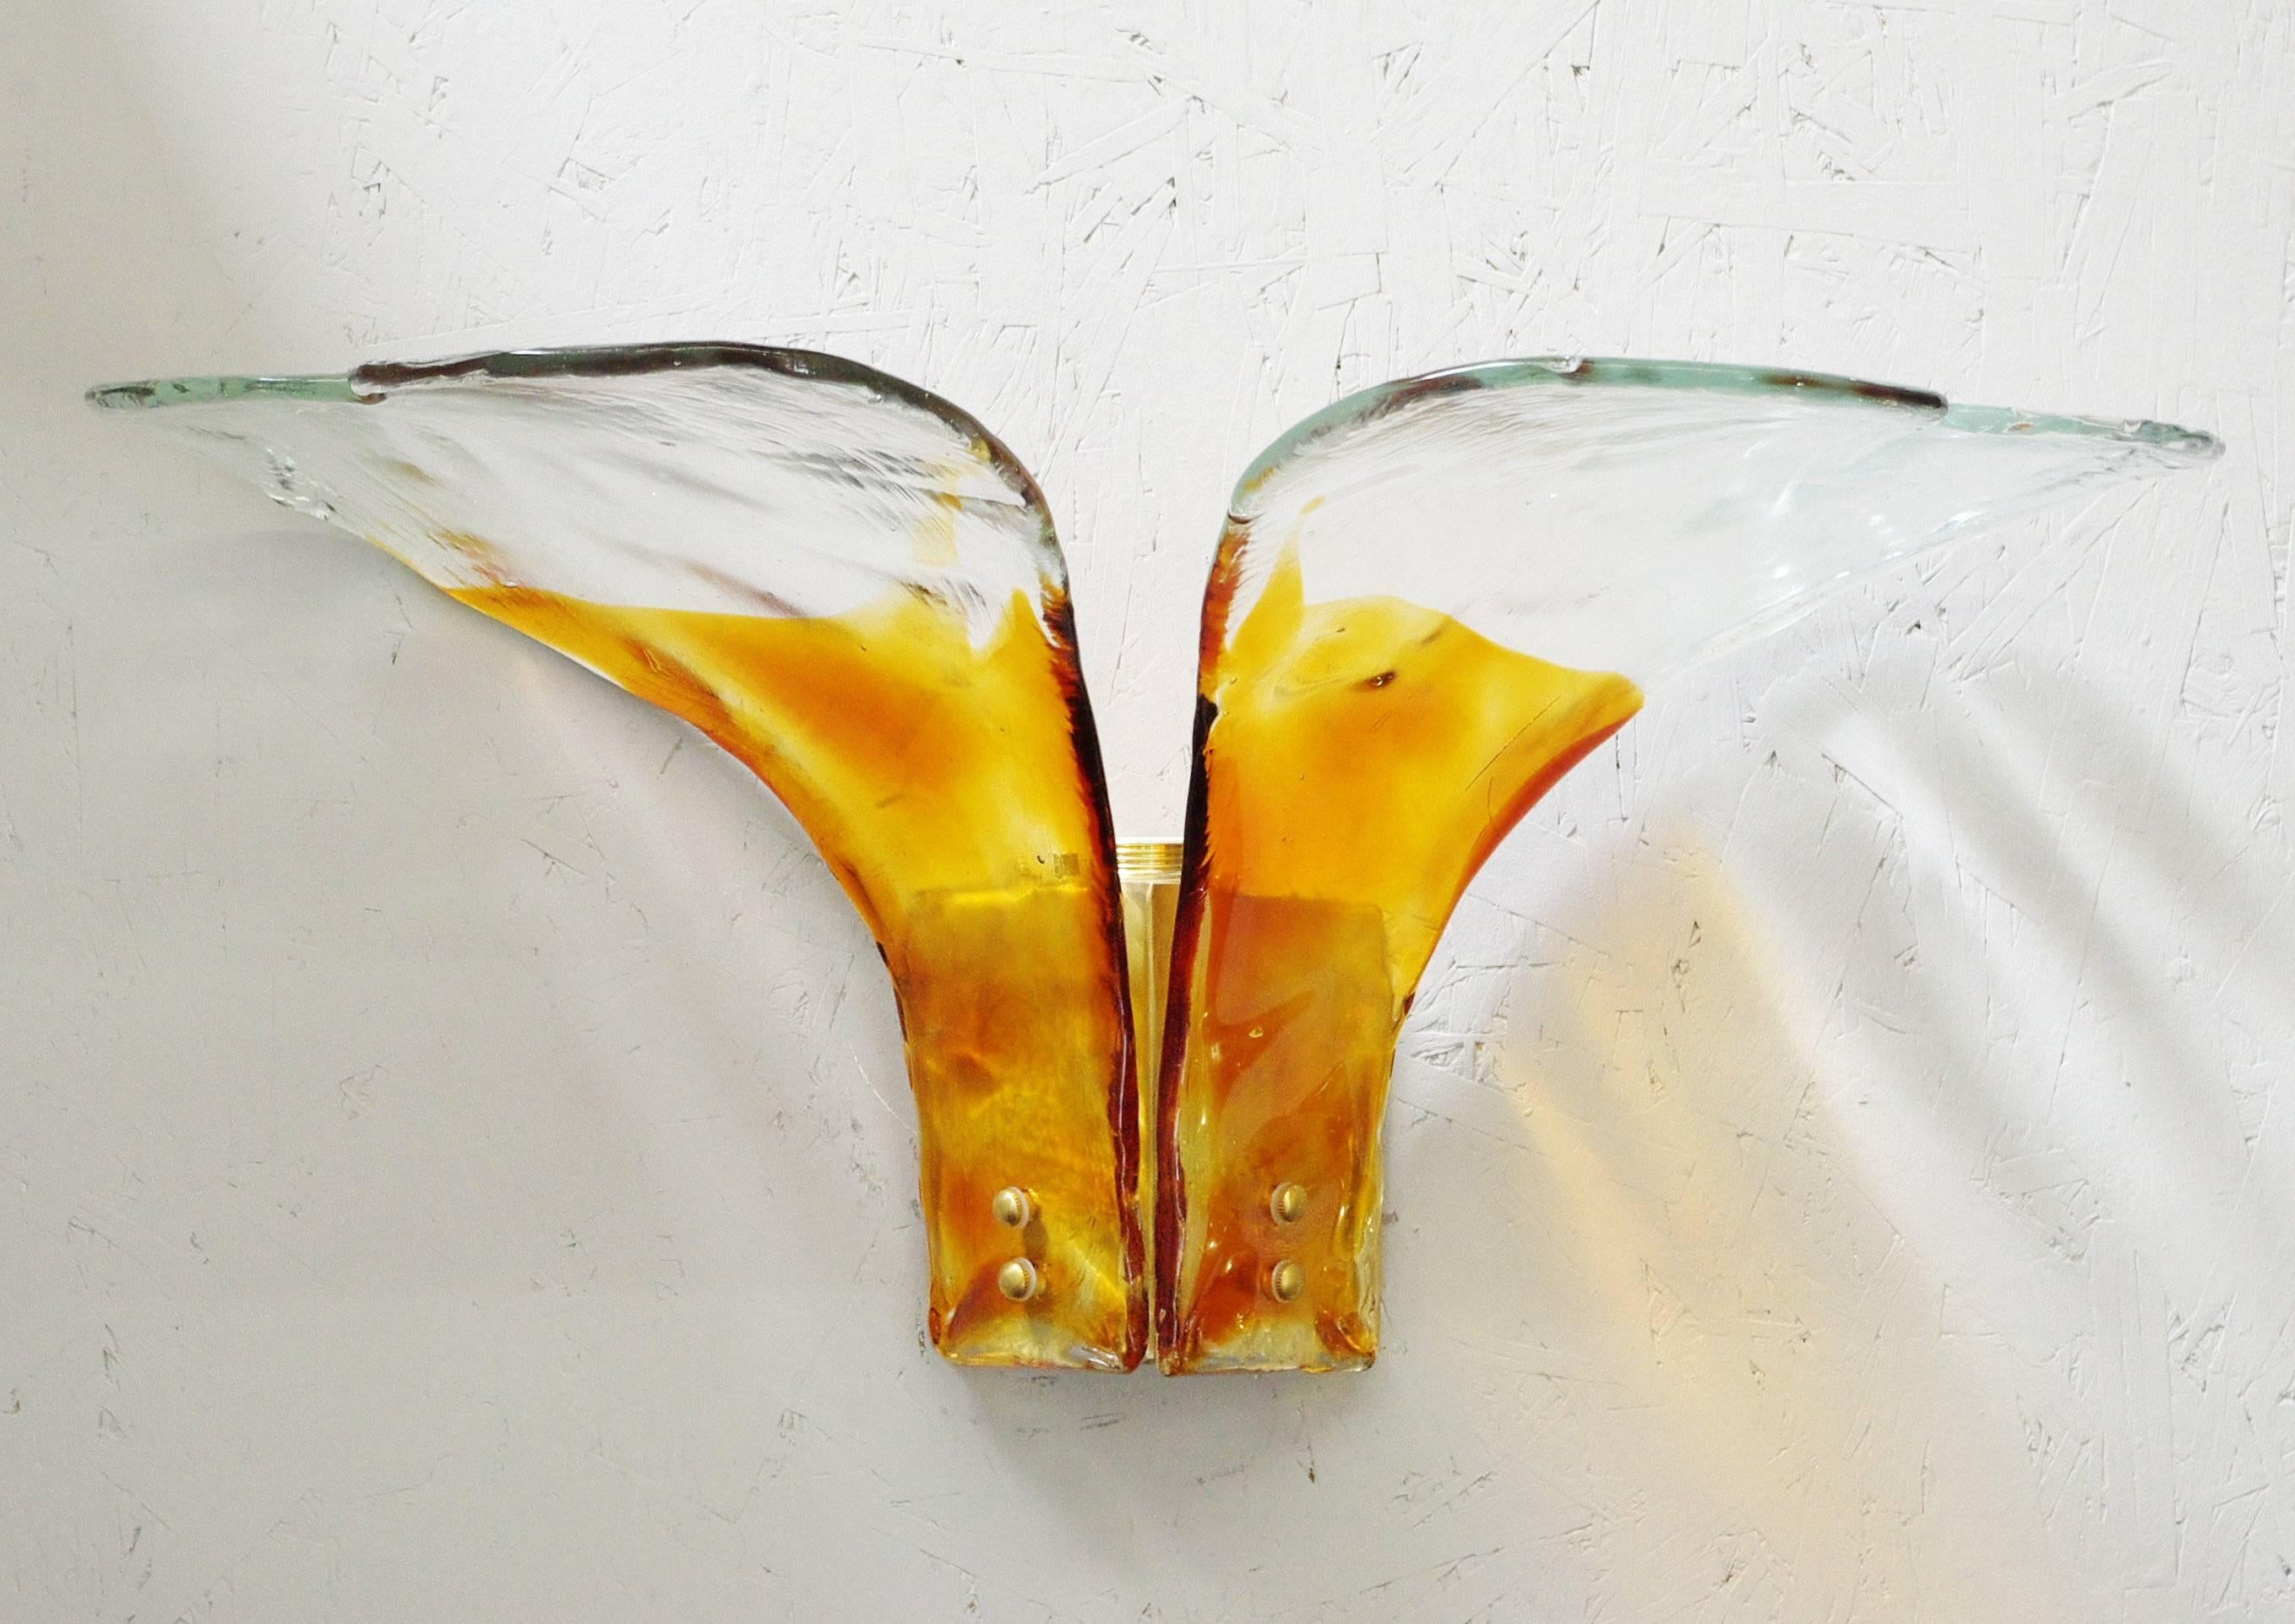 Vintage Italian wall lights with hand blown amber and clear Murano glasses mounted on brass frames / Designed by Carlo Nason, circa 1960’s / Made in Italy
1 light / E26 or E27 type / max 40W each
Height: 15 inches / Width: 26 inches / Depth: 13